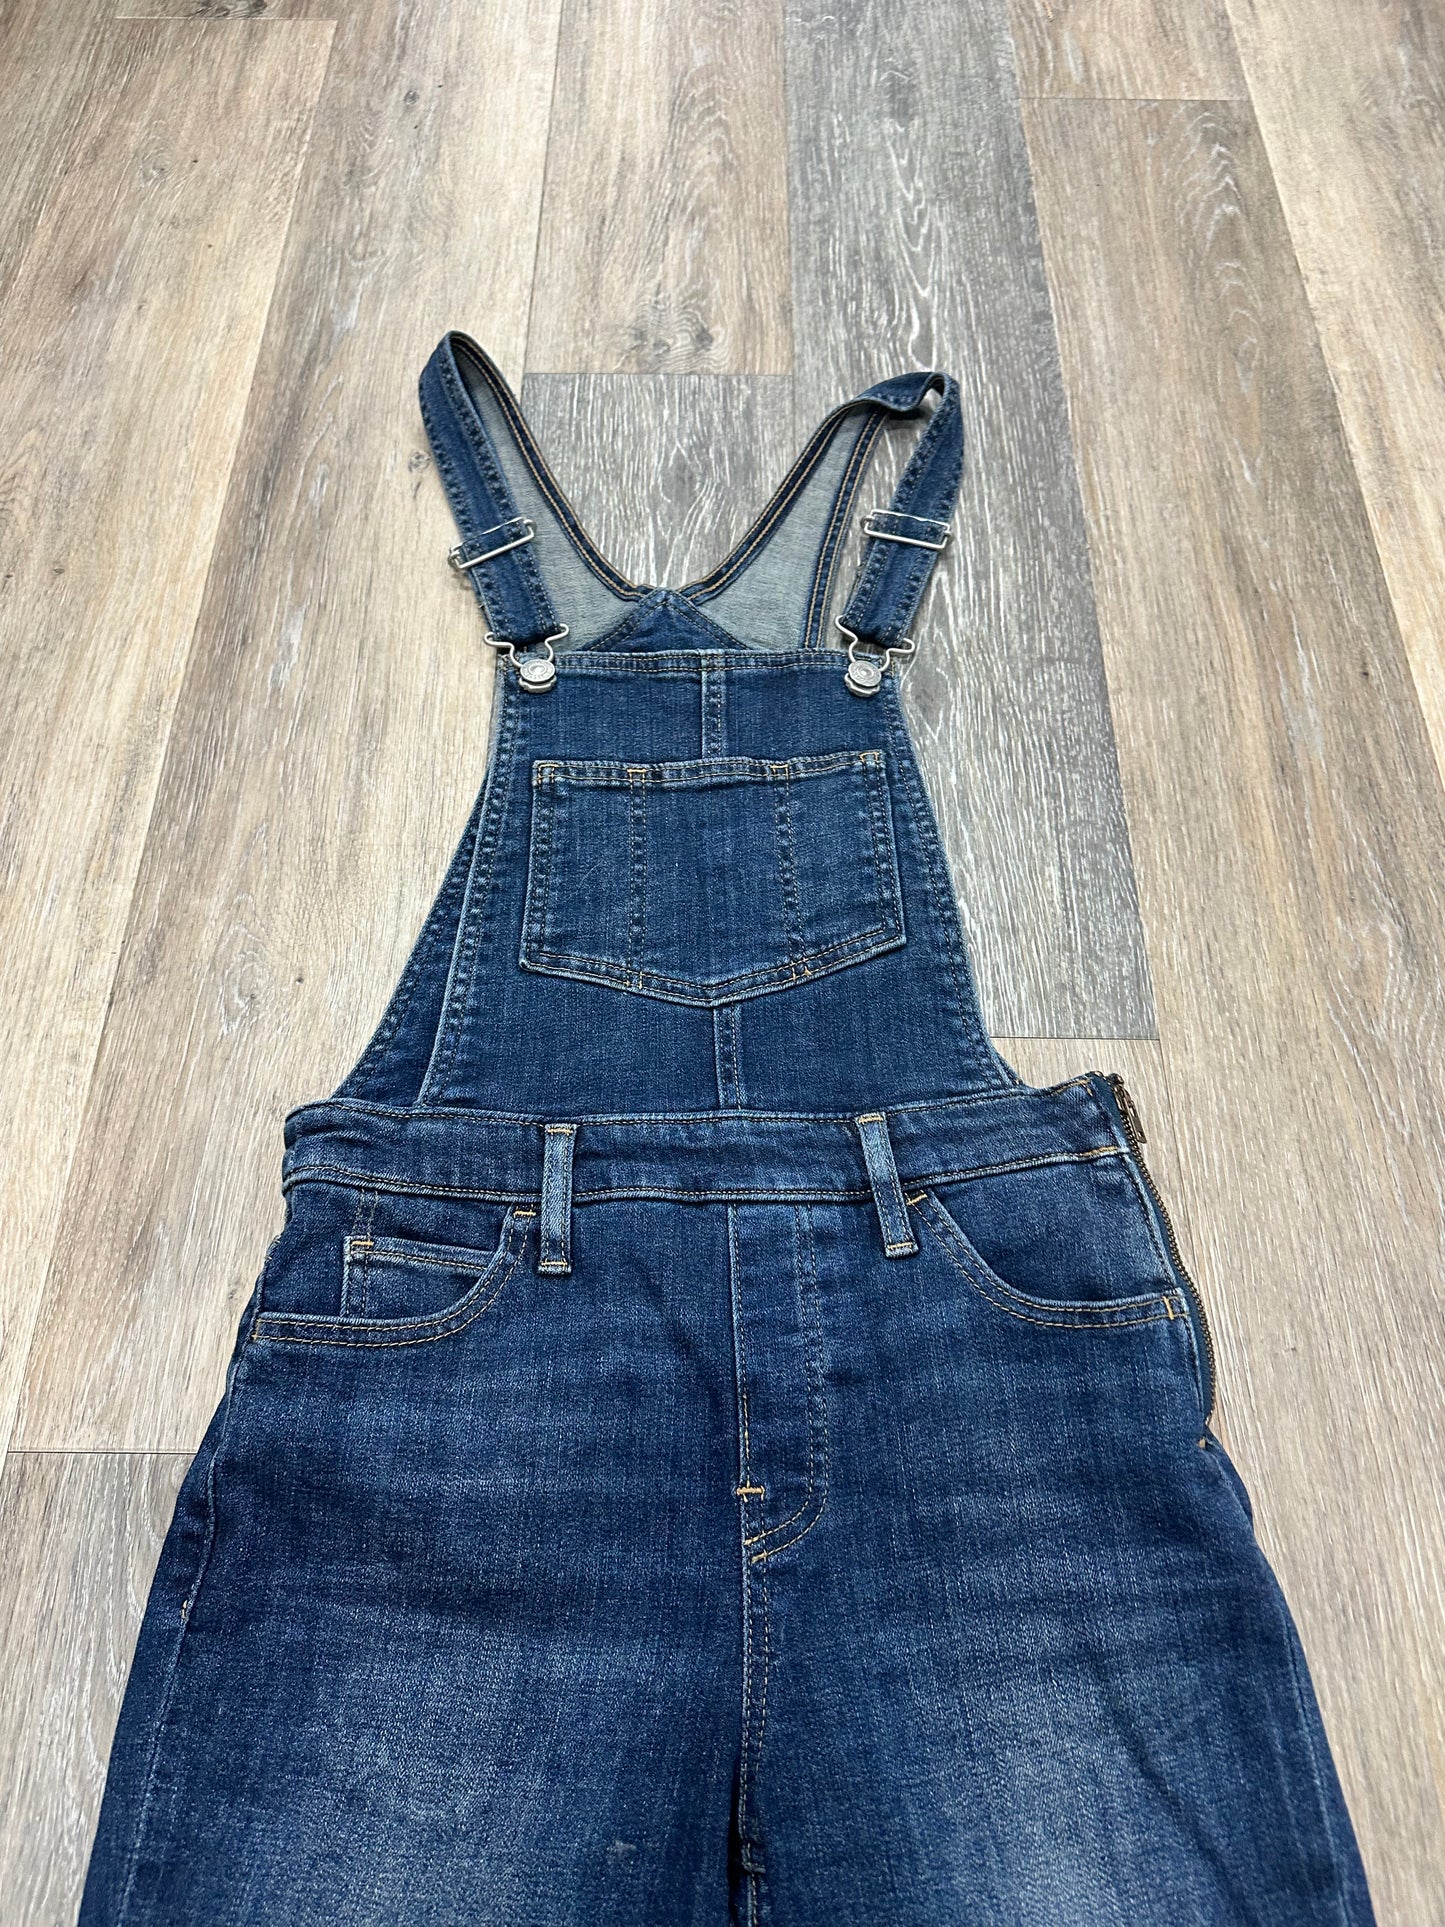 Overalls By Levis  Size: 2